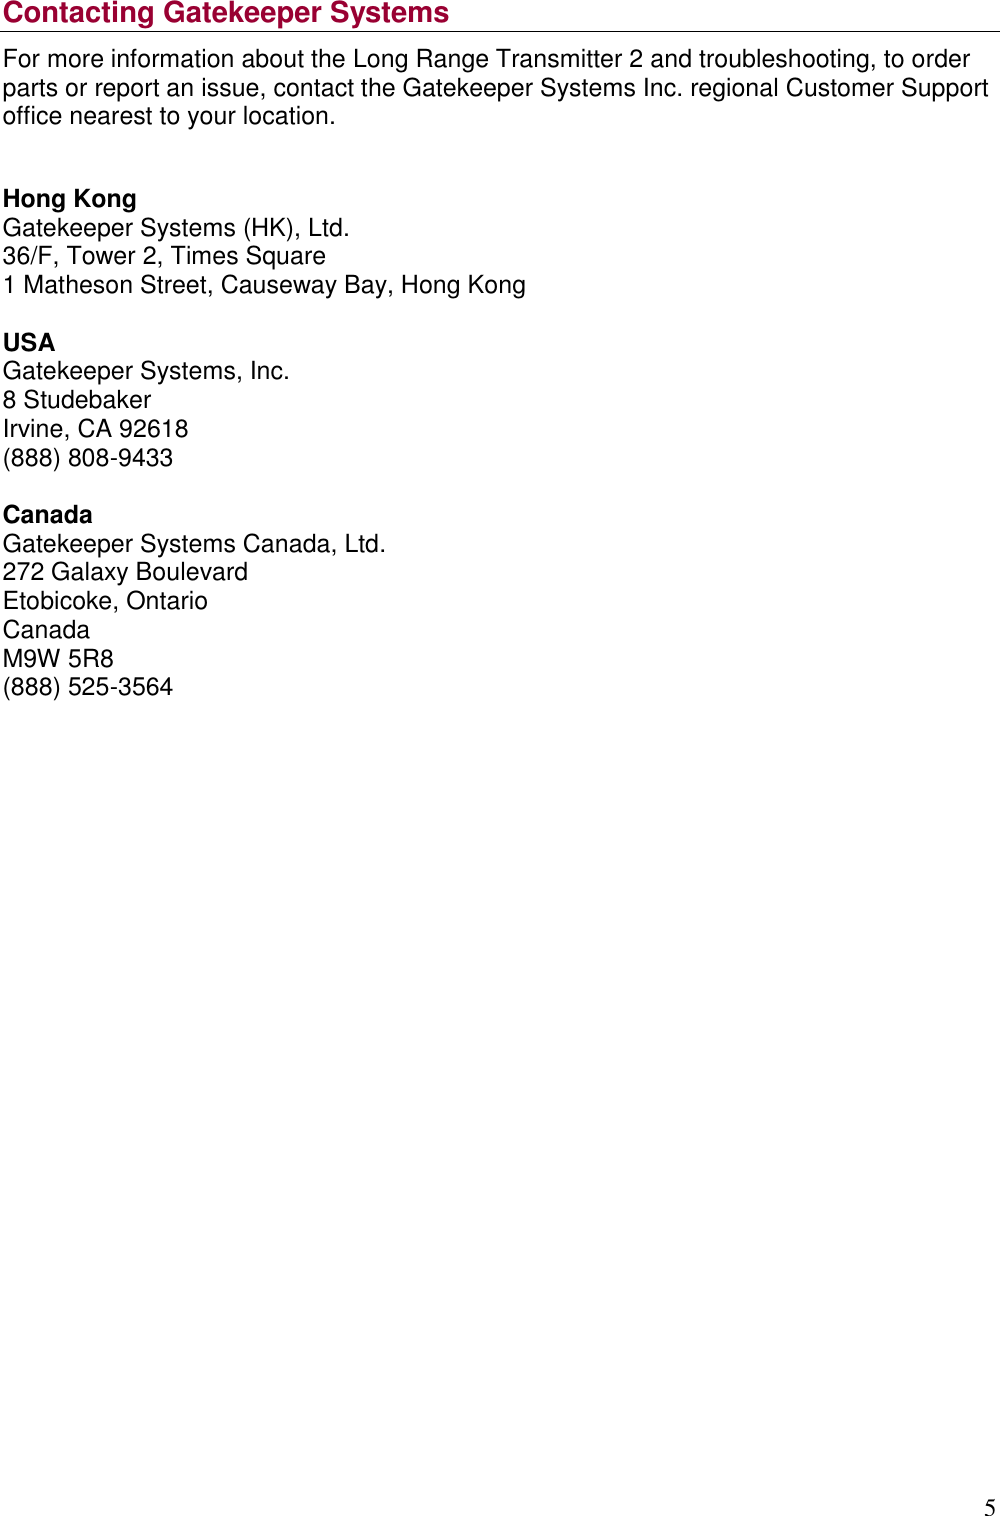 5  Contacting Gatekeeper Systems For more information about the Long Range Transmitter 2 and troubleshooting, to order parts or report an issue, contact the Gatekeeper Systems Inc. regional Customer Support office nearest to your location.  Hong Kong Gatekeeper Systems (HK), Ltd. 36/F, Tower 2, Times Square 1 Matheson Street, Causeway Bay, Hong Kong  USA Gatekeeper Systems, Inc. 8 Studebaker Irvine, CA 92618 (888) 808-9433  Canada Gatekeeper Systems Canada, Ltd. 272 Galaxy Boulevard Etobicoke, Ontario Canada M9W 5R8 (888) 525-3564      